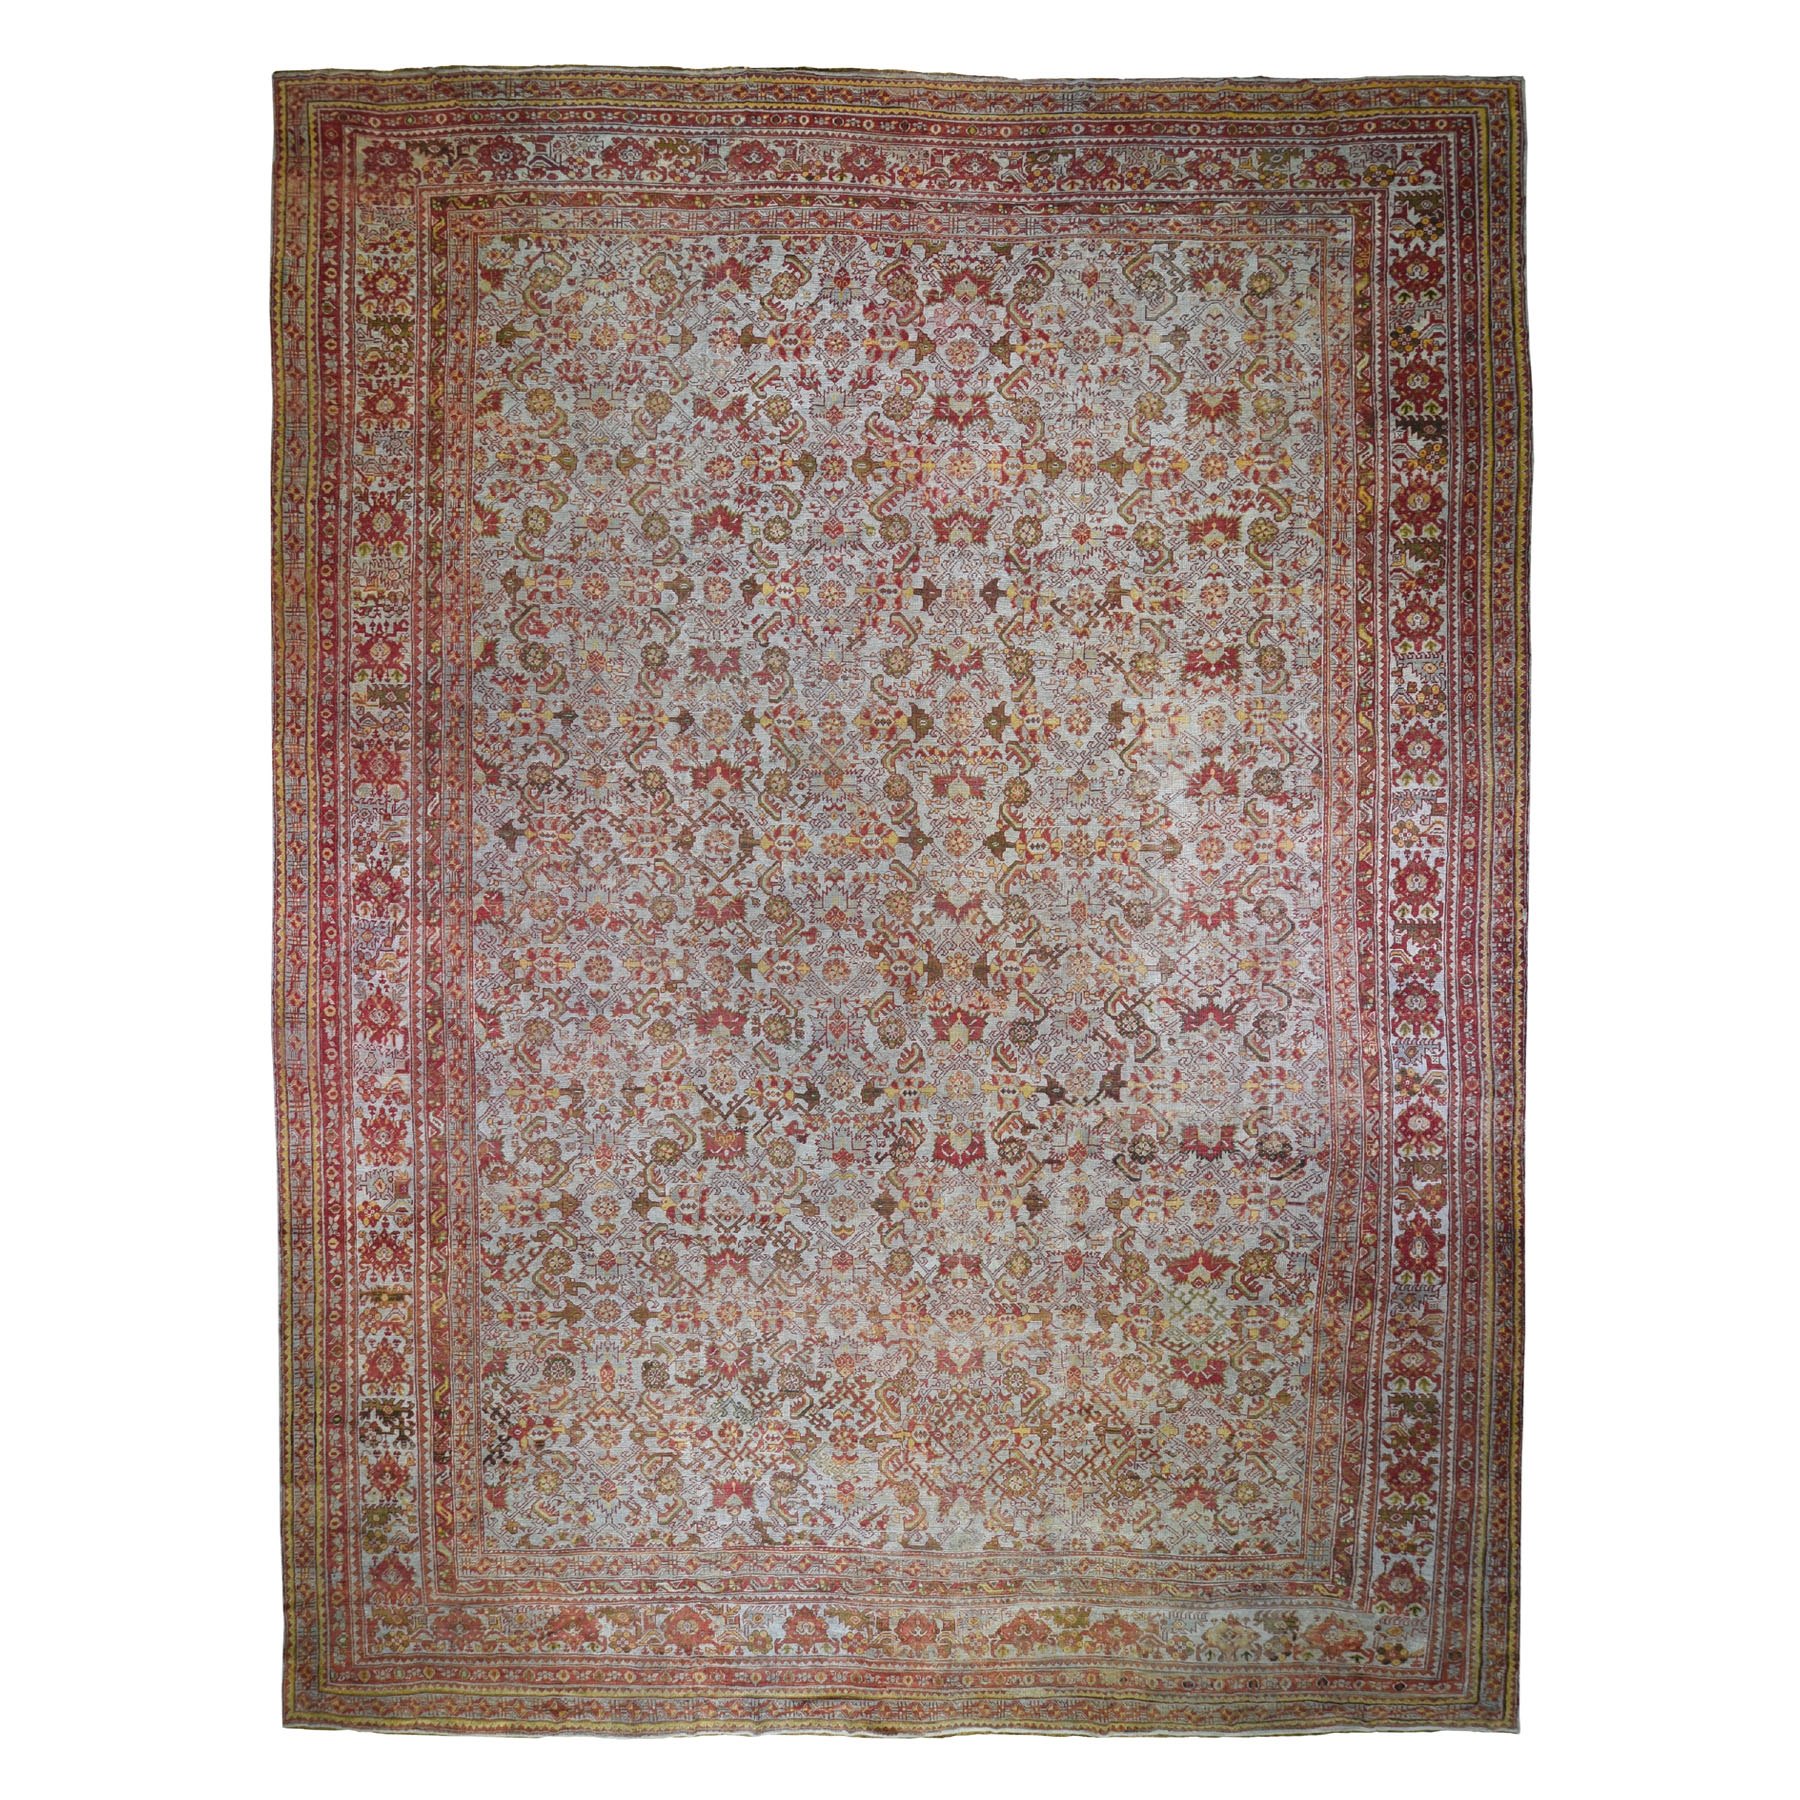 16'8"x21' Mansion Size Antique Turkish Oushak All Over Design Pure Wool Hand Woven Oriental Rug 